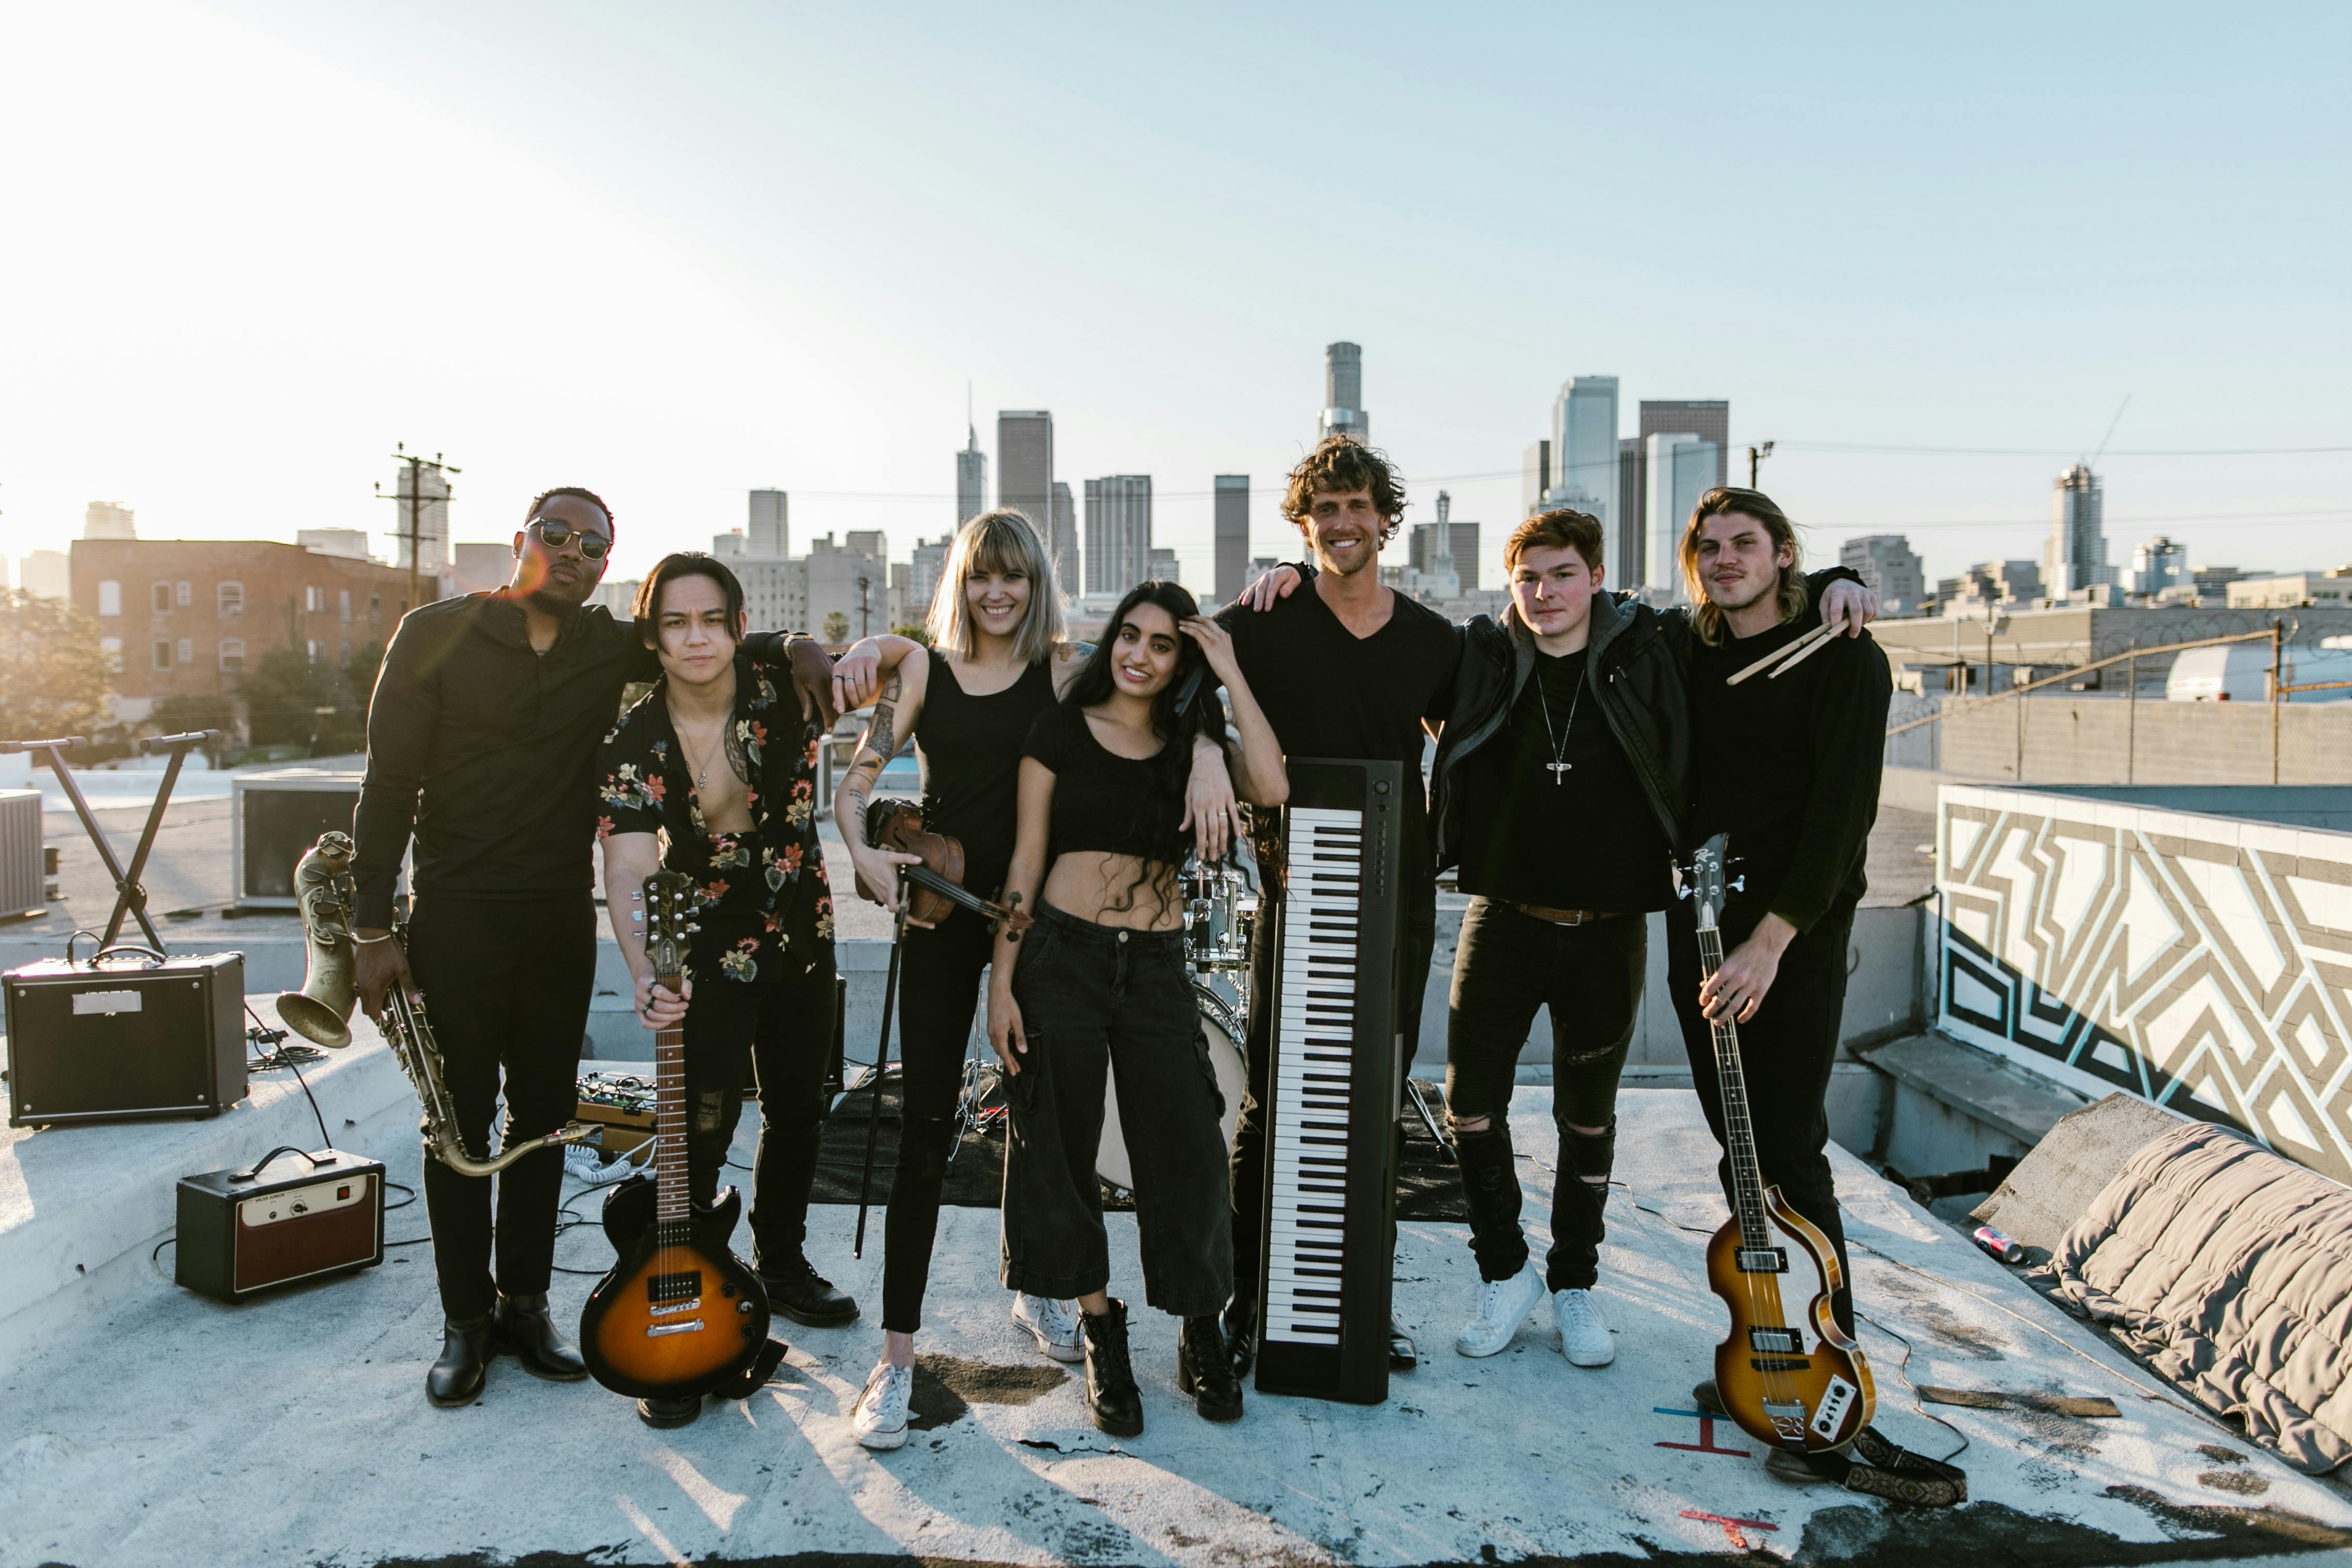 group photo of music band with instruments standing on the rooftop